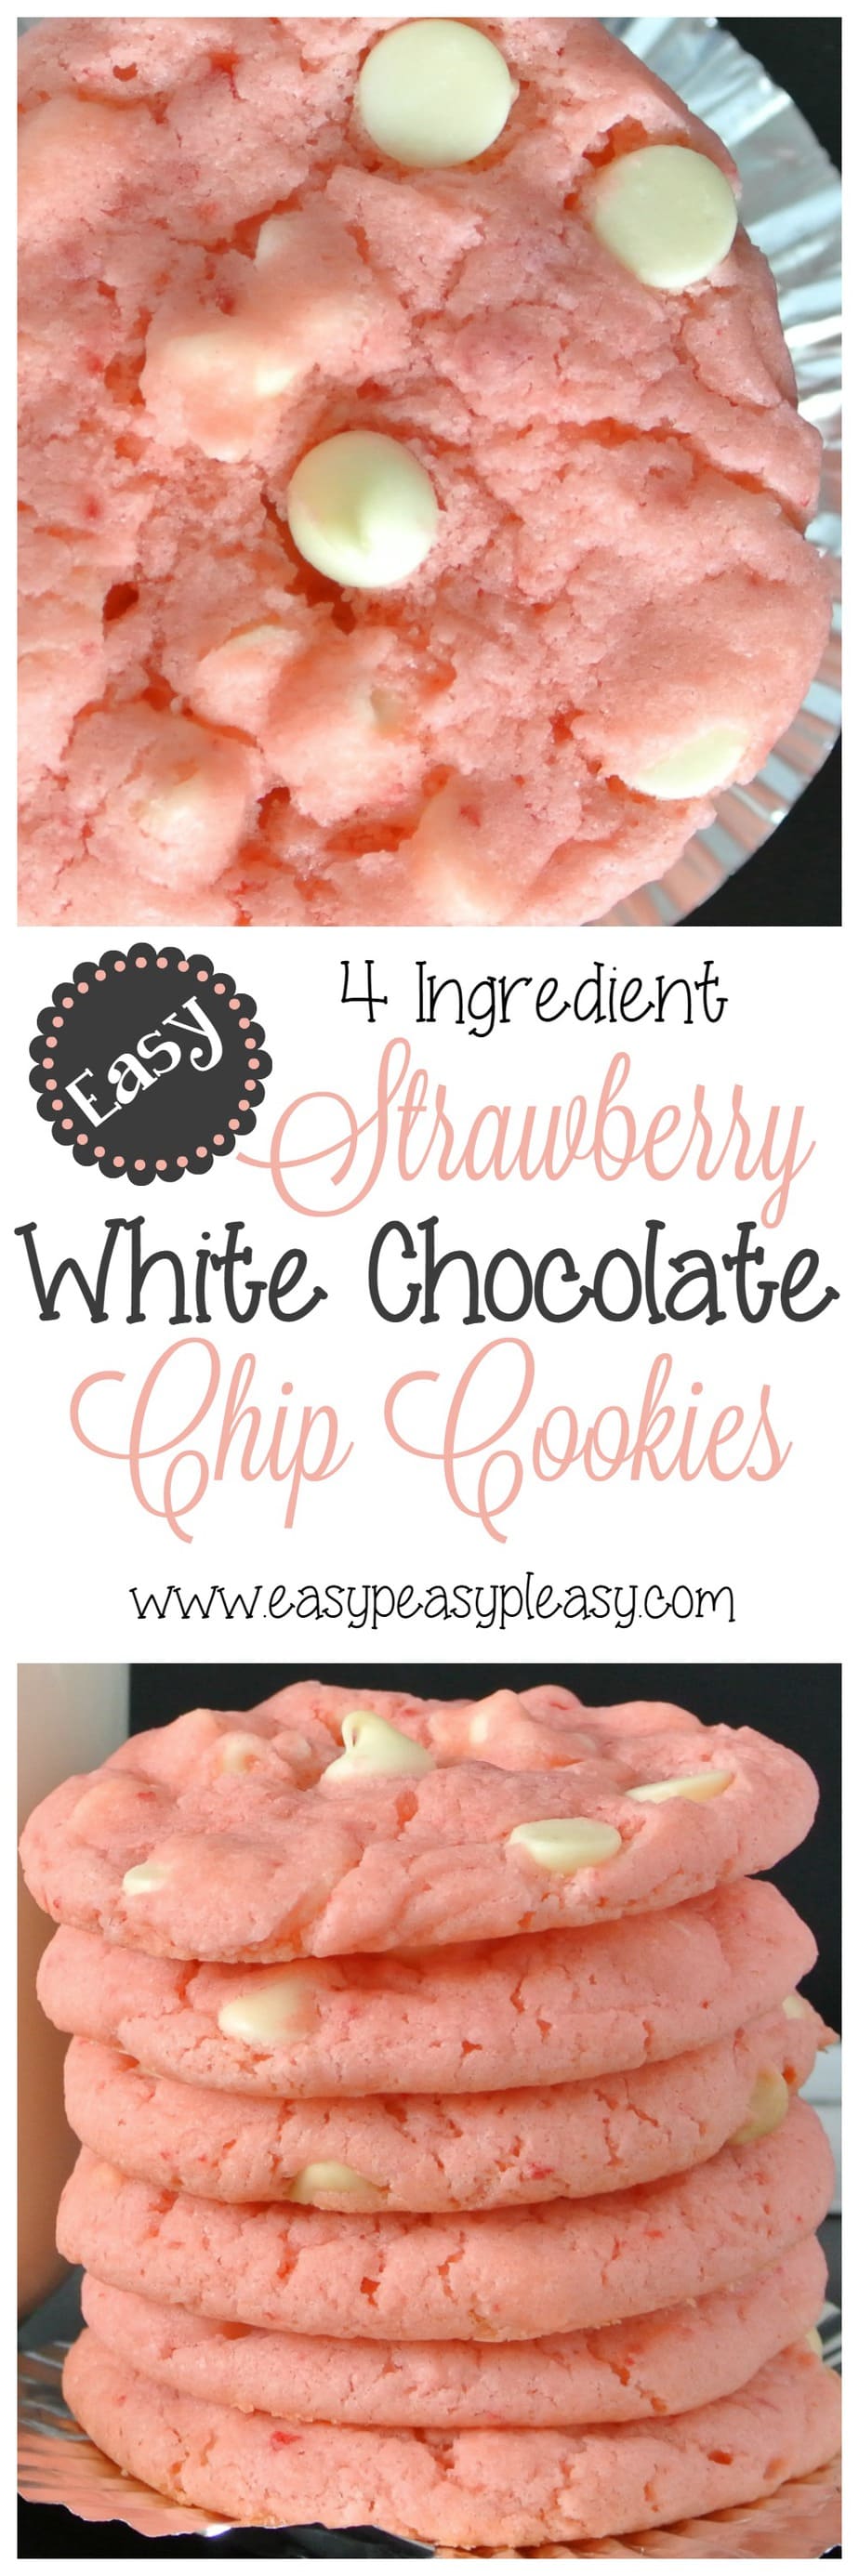 Do you want to see how easy these Strawberry White Chocolate Chip Cookies really are There are only 4 ingredients and they are oh so scrumptious! These would be great for Valentine's Day or any other day for that matter